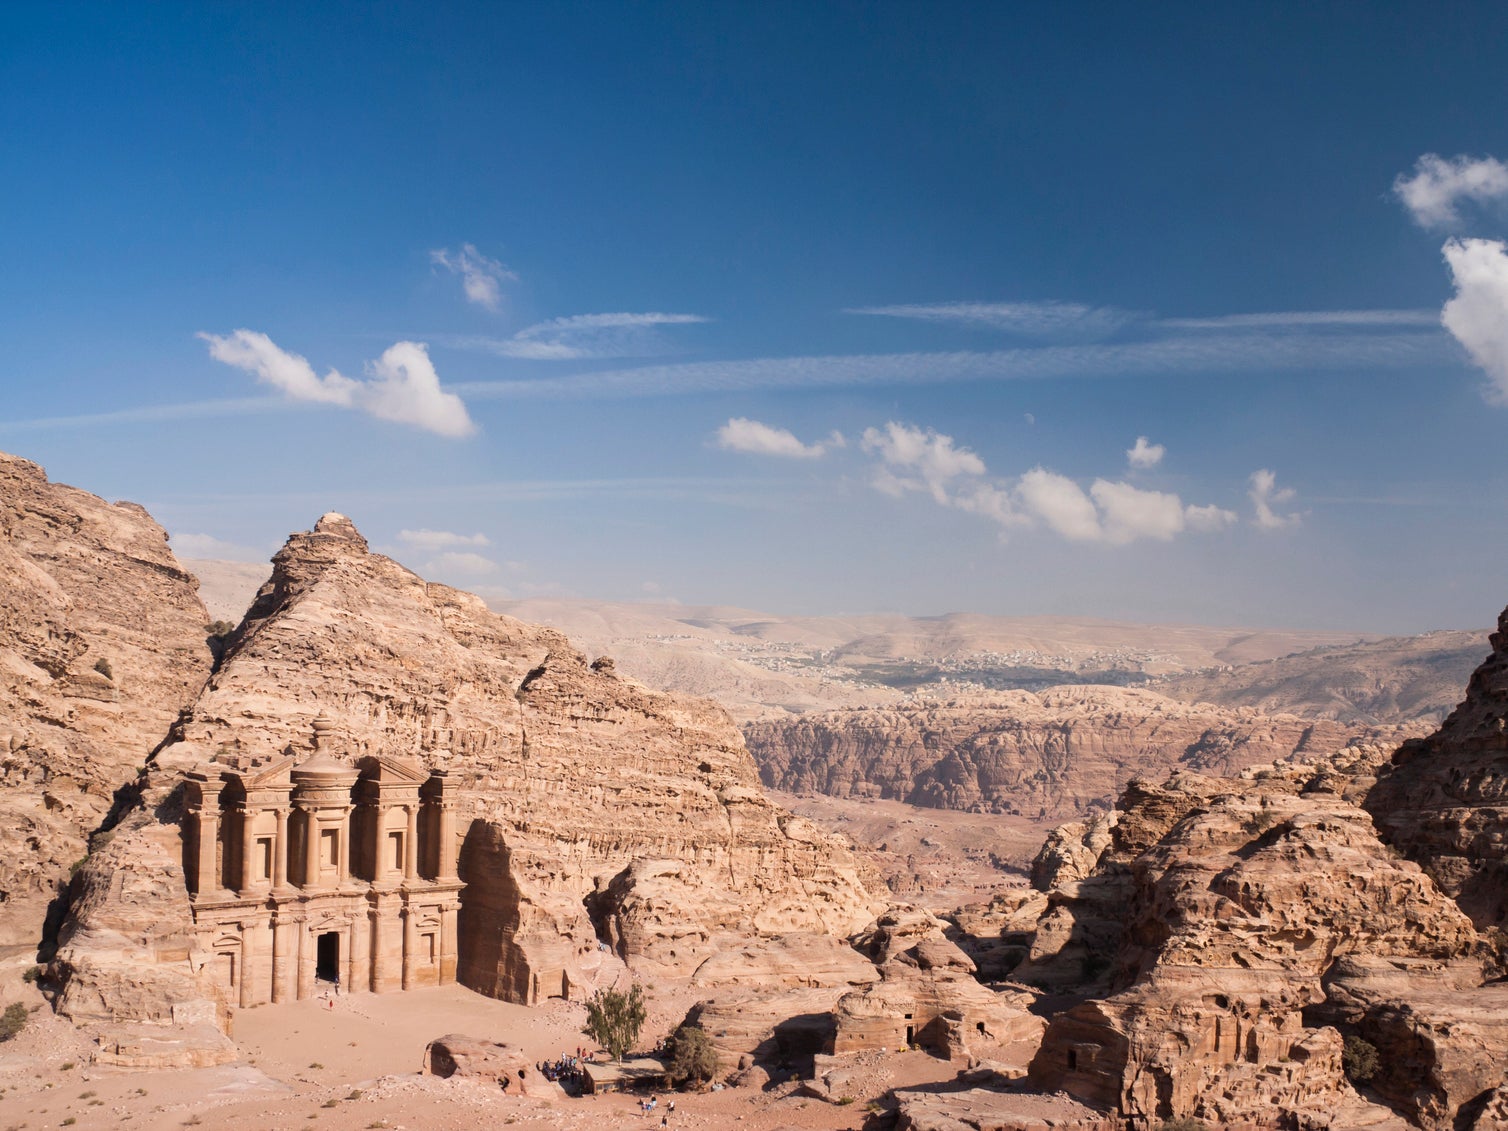 The monastery at Petra in Jordan is one of the new seven wonders of the world